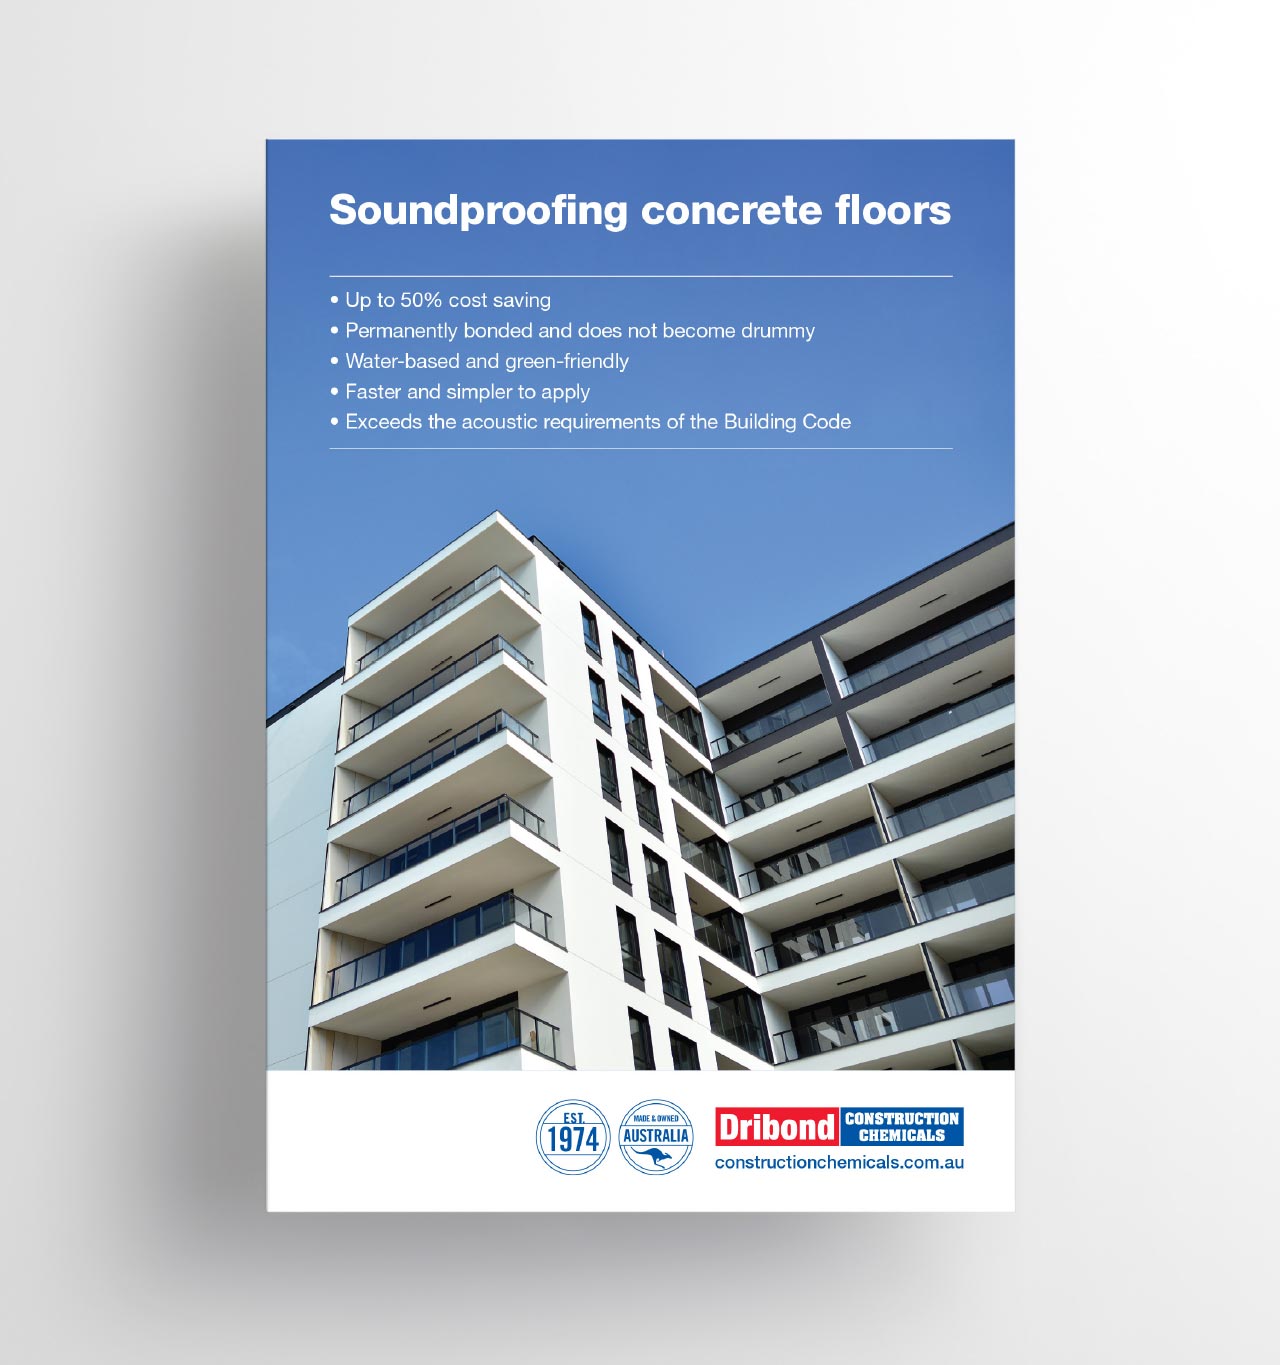 Dribond Construction Chemicals soundproofing brochure